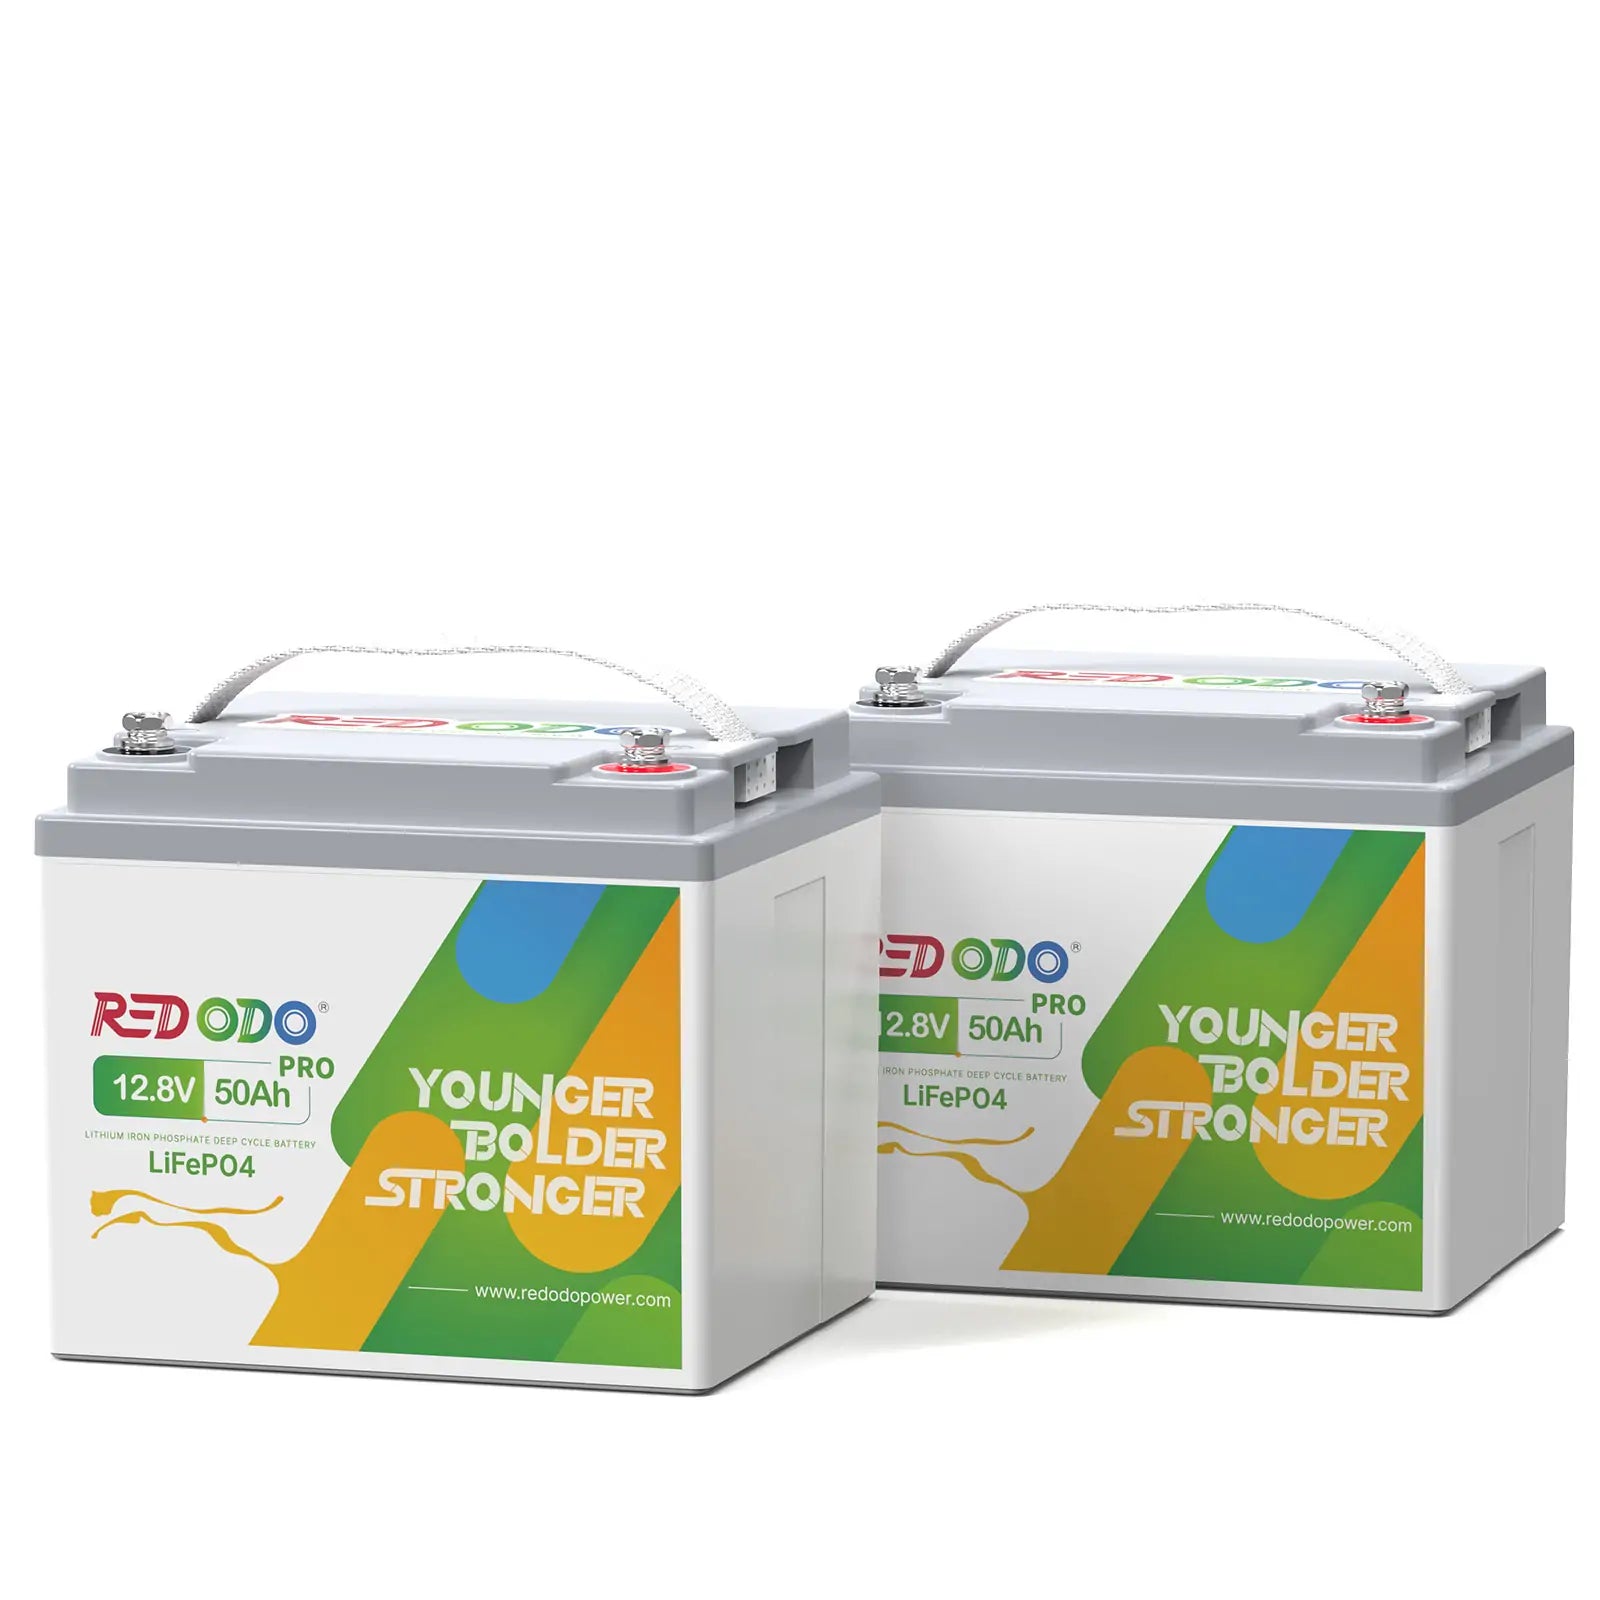 12.8V 50Ah Lifepo4 Deep Cycle Battery 640WH 6000+ Cycle With Built